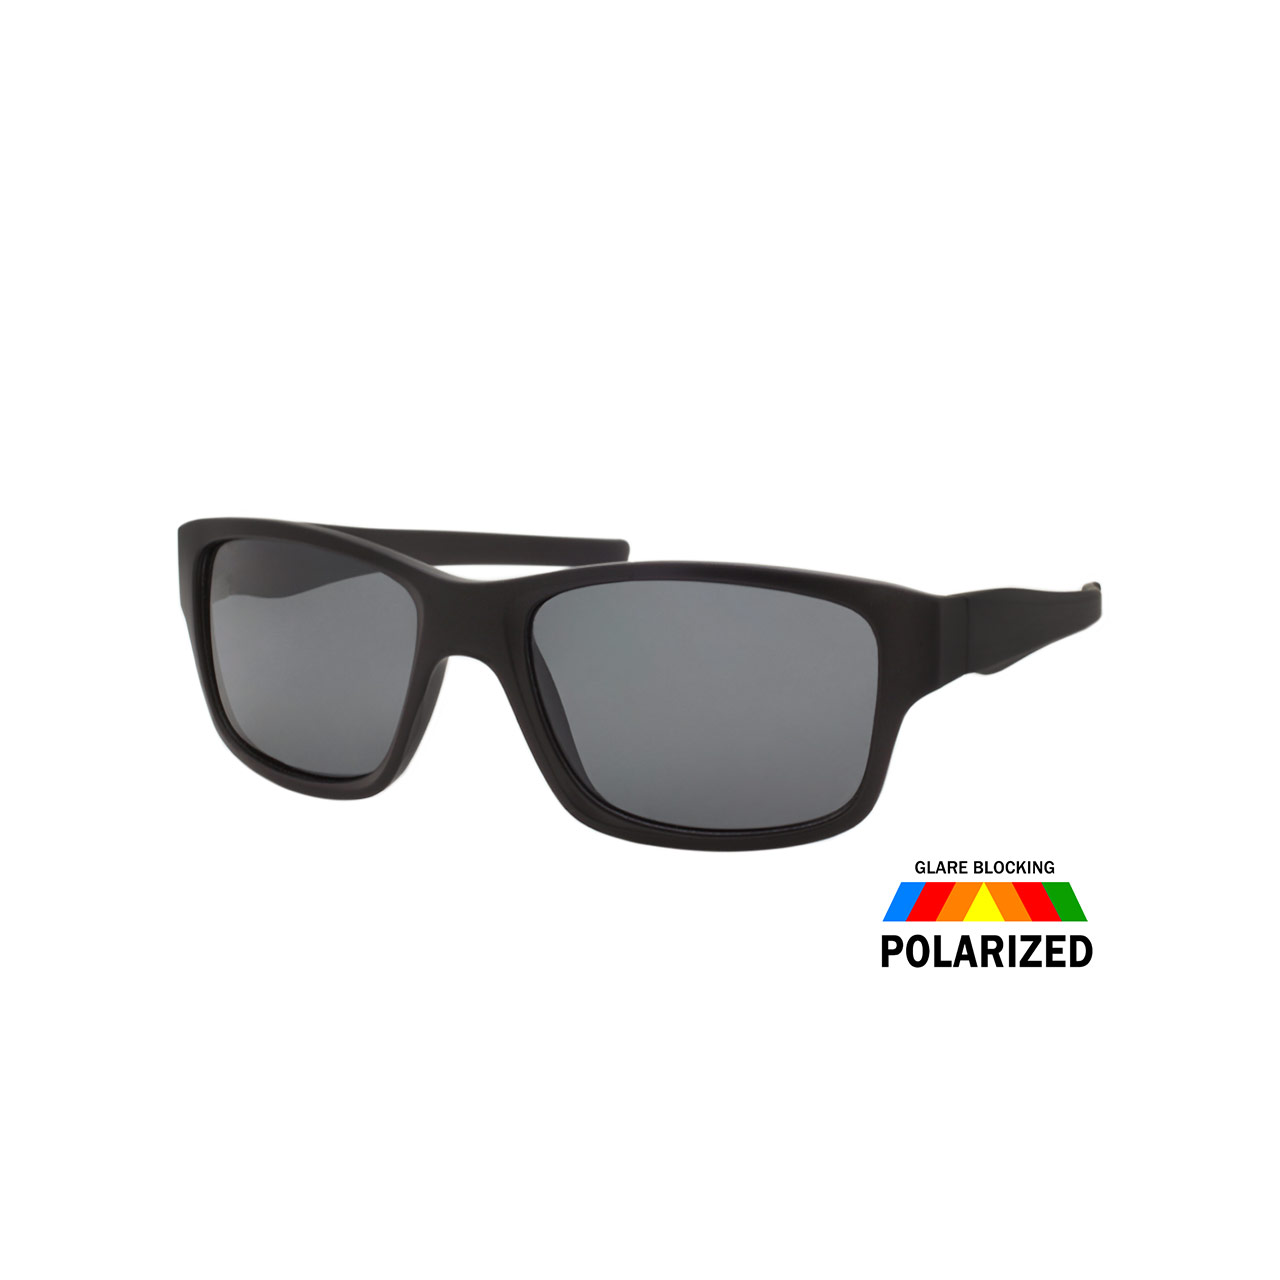 Mens Polarized Sunglasses 2 Pack All Black Sport Wrap Sunglass Style - image 3 of 5